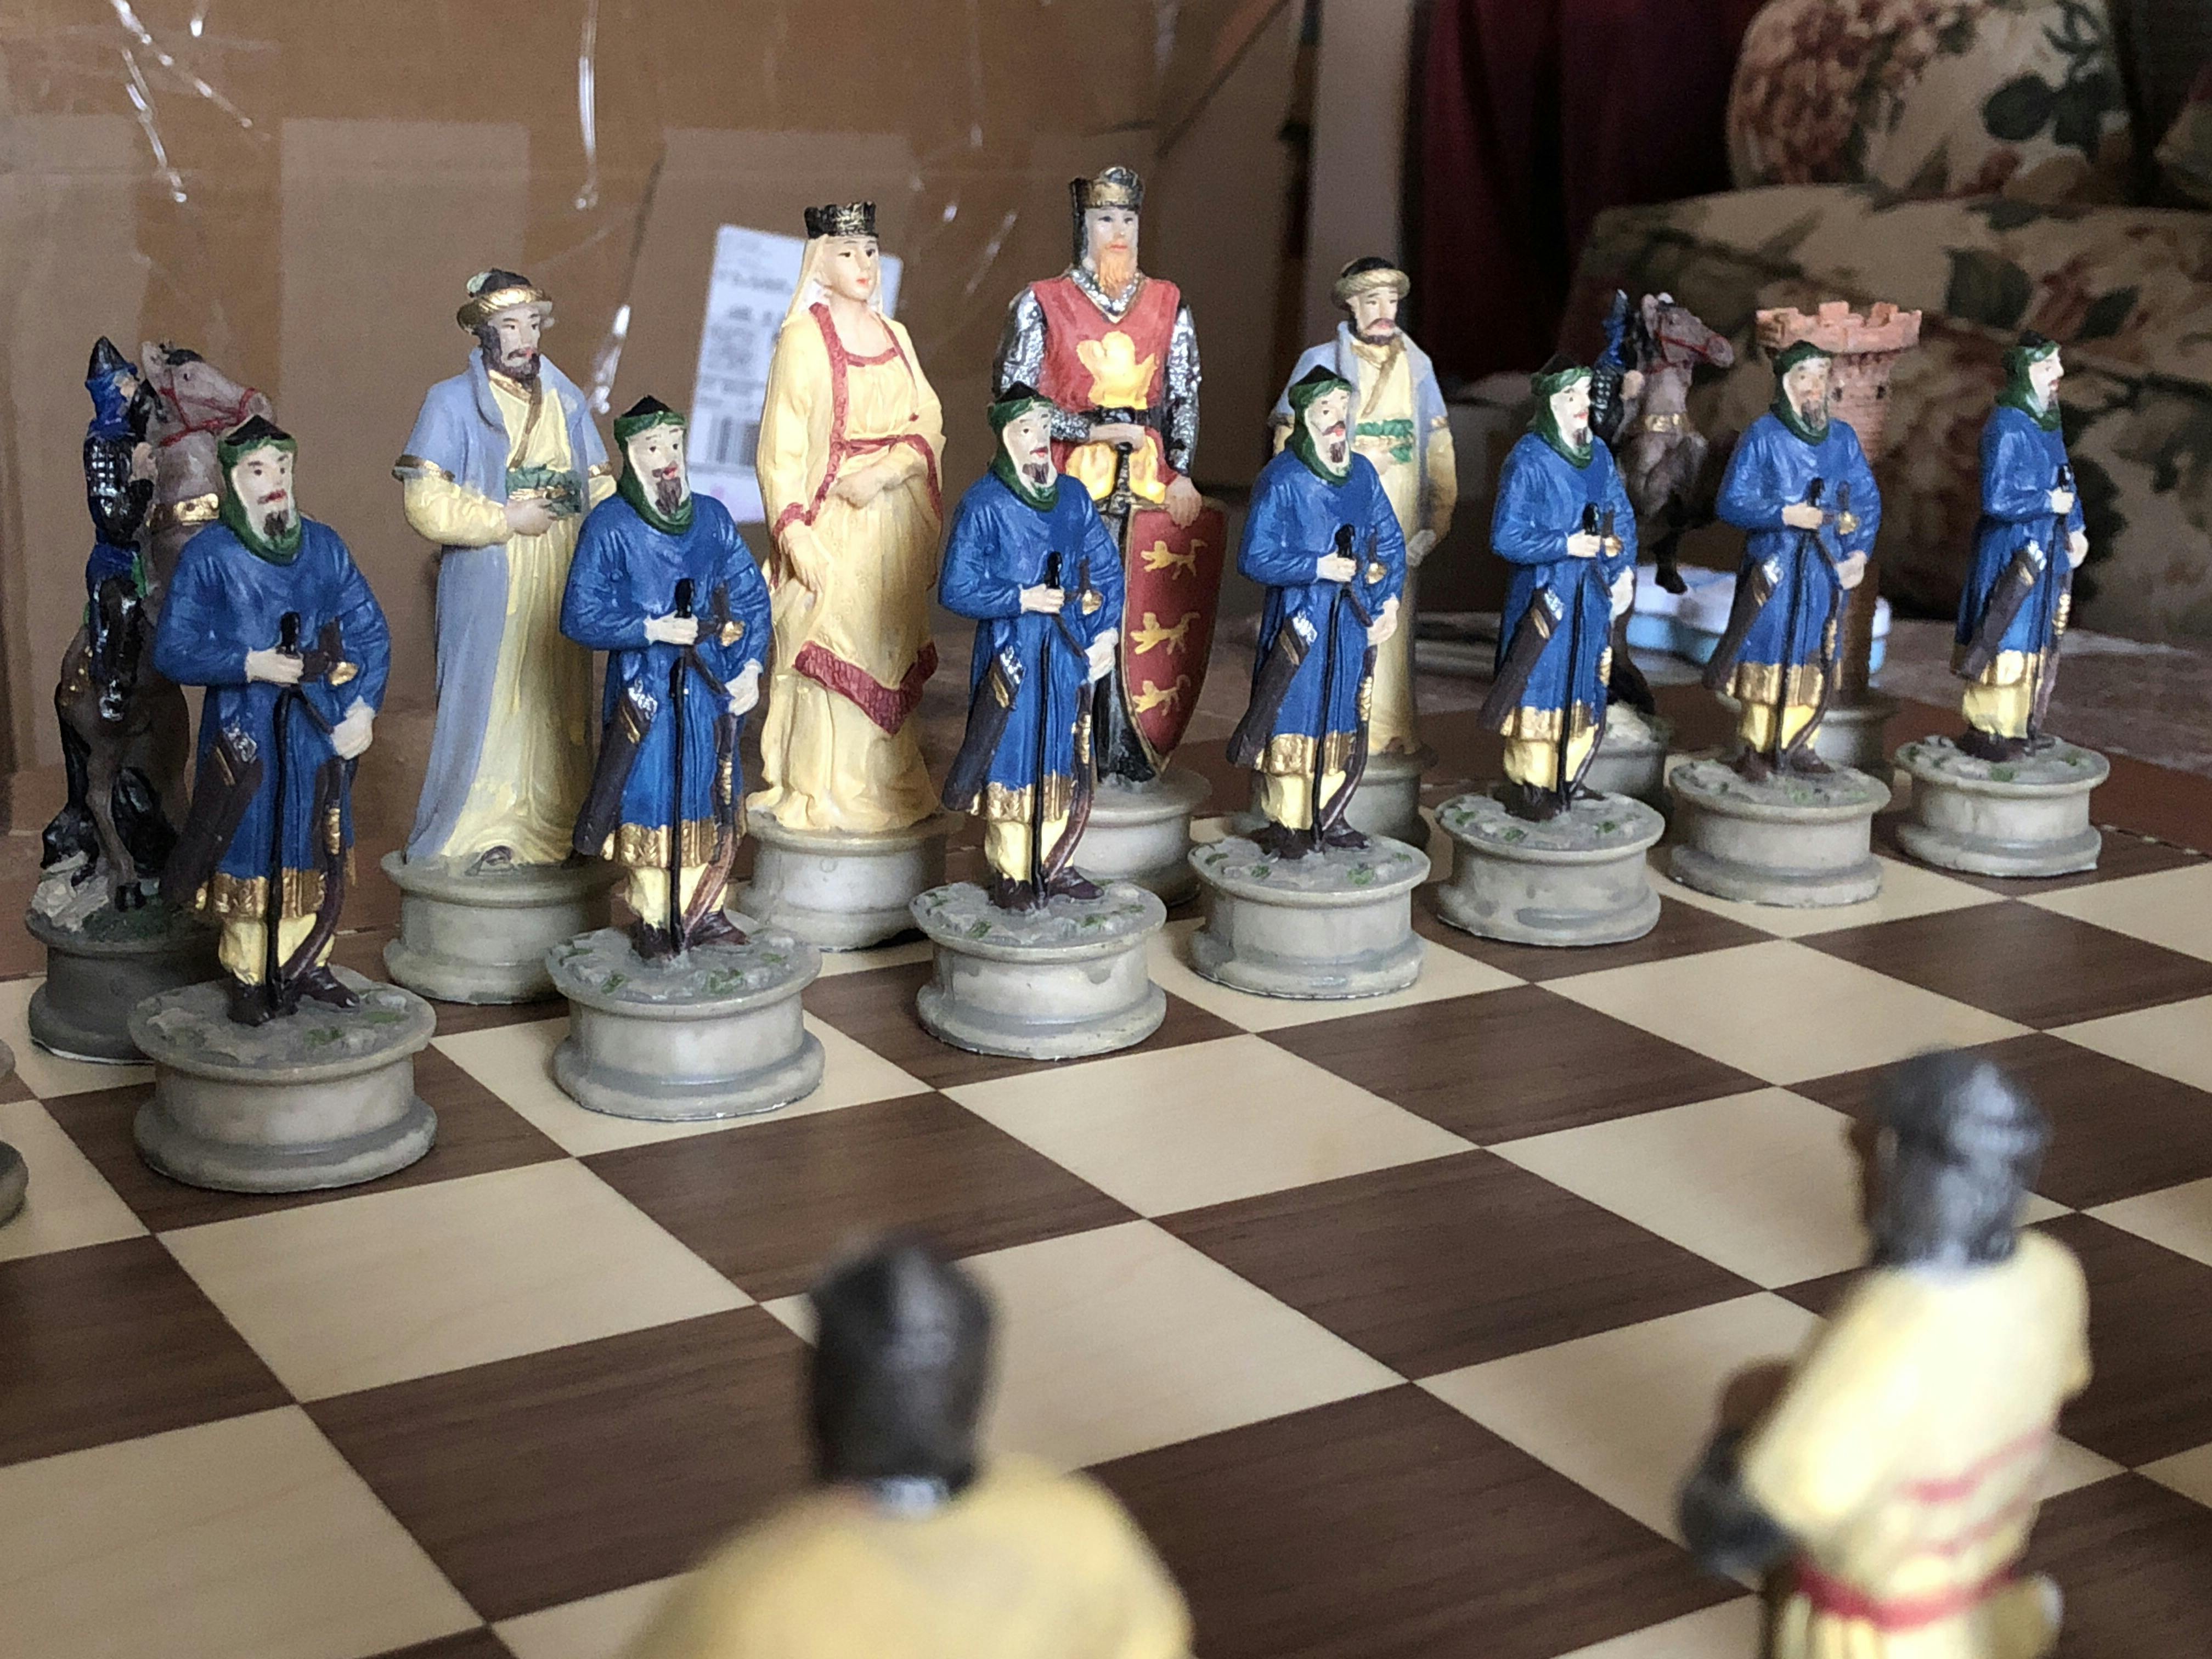 medieval knight chess set